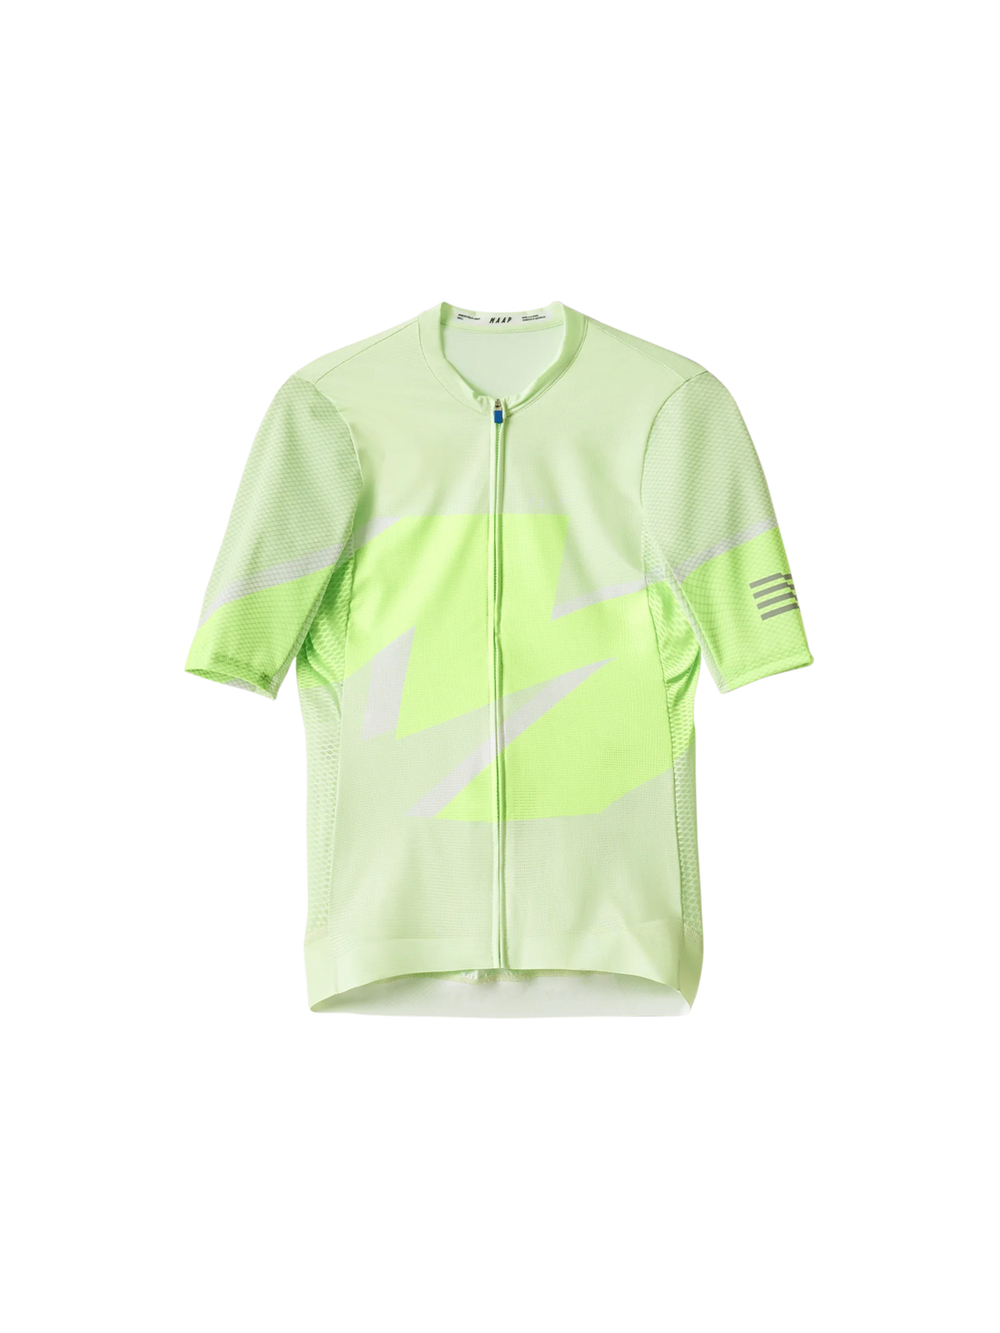 Product Image for Women's Evolve 3D Pro Air Jersey 2.0